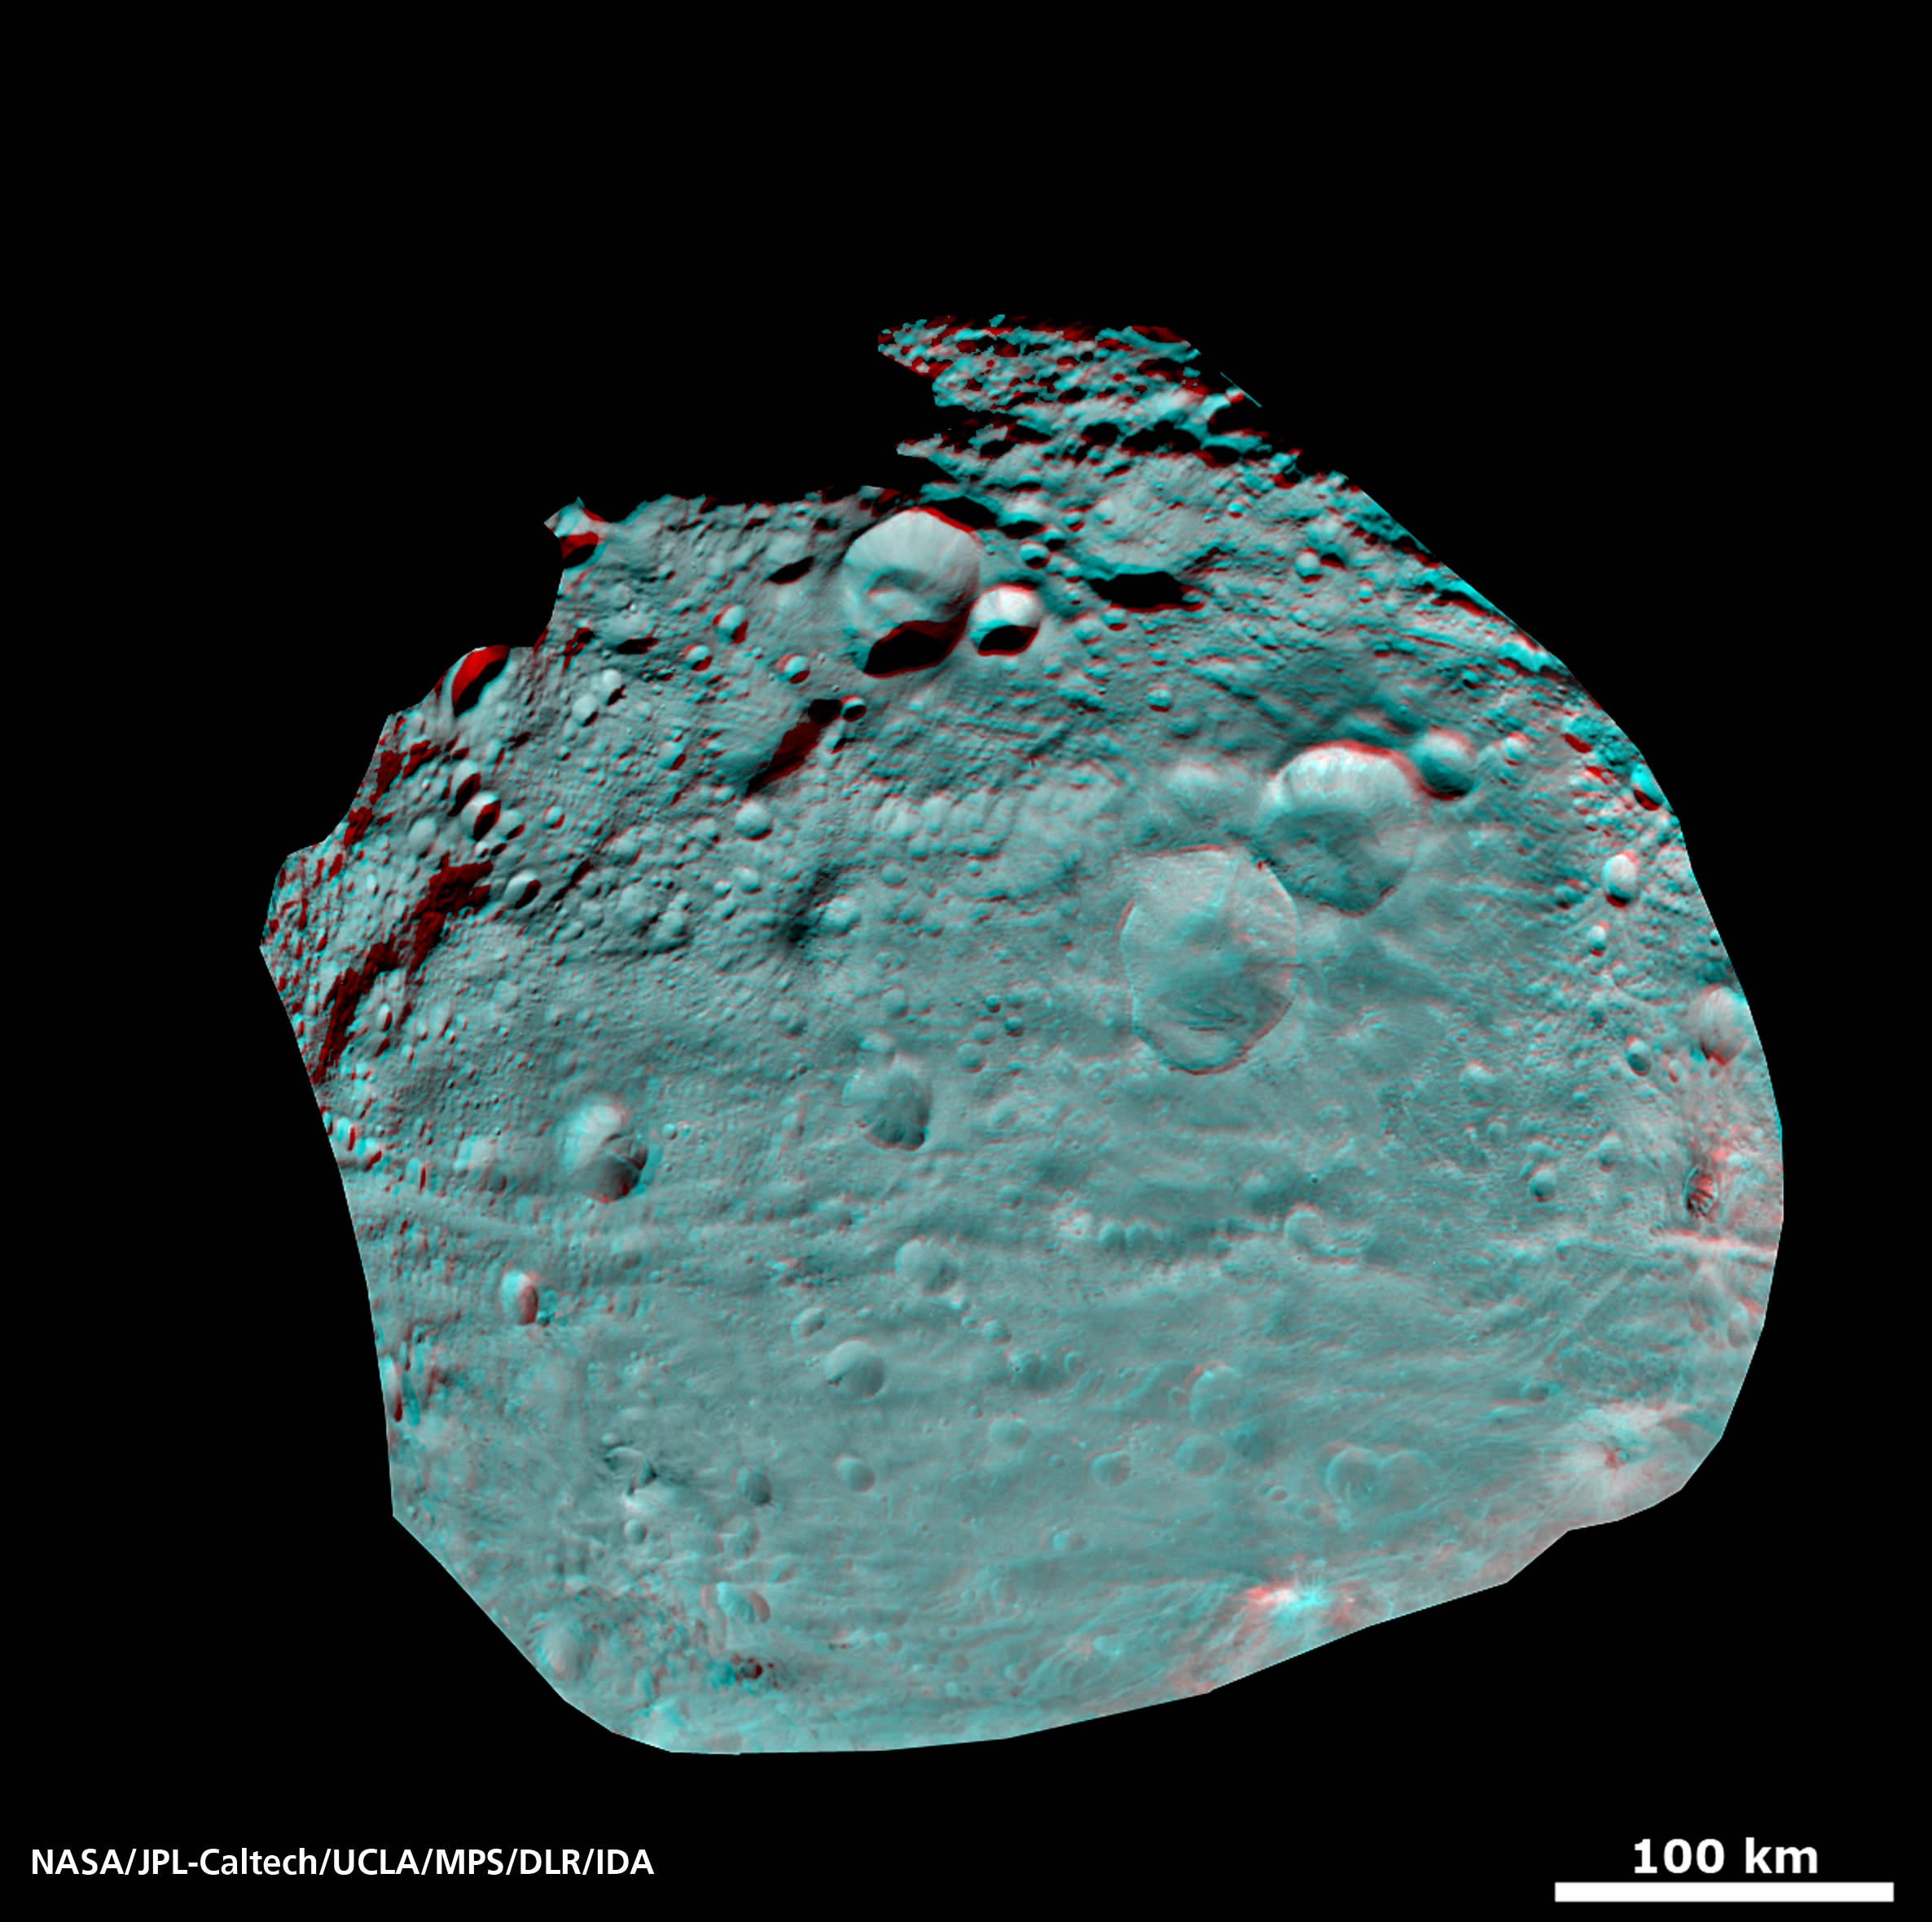 PIA14707_RC3_8168_6968_orth_anaglyph_2X+CL1.jpg